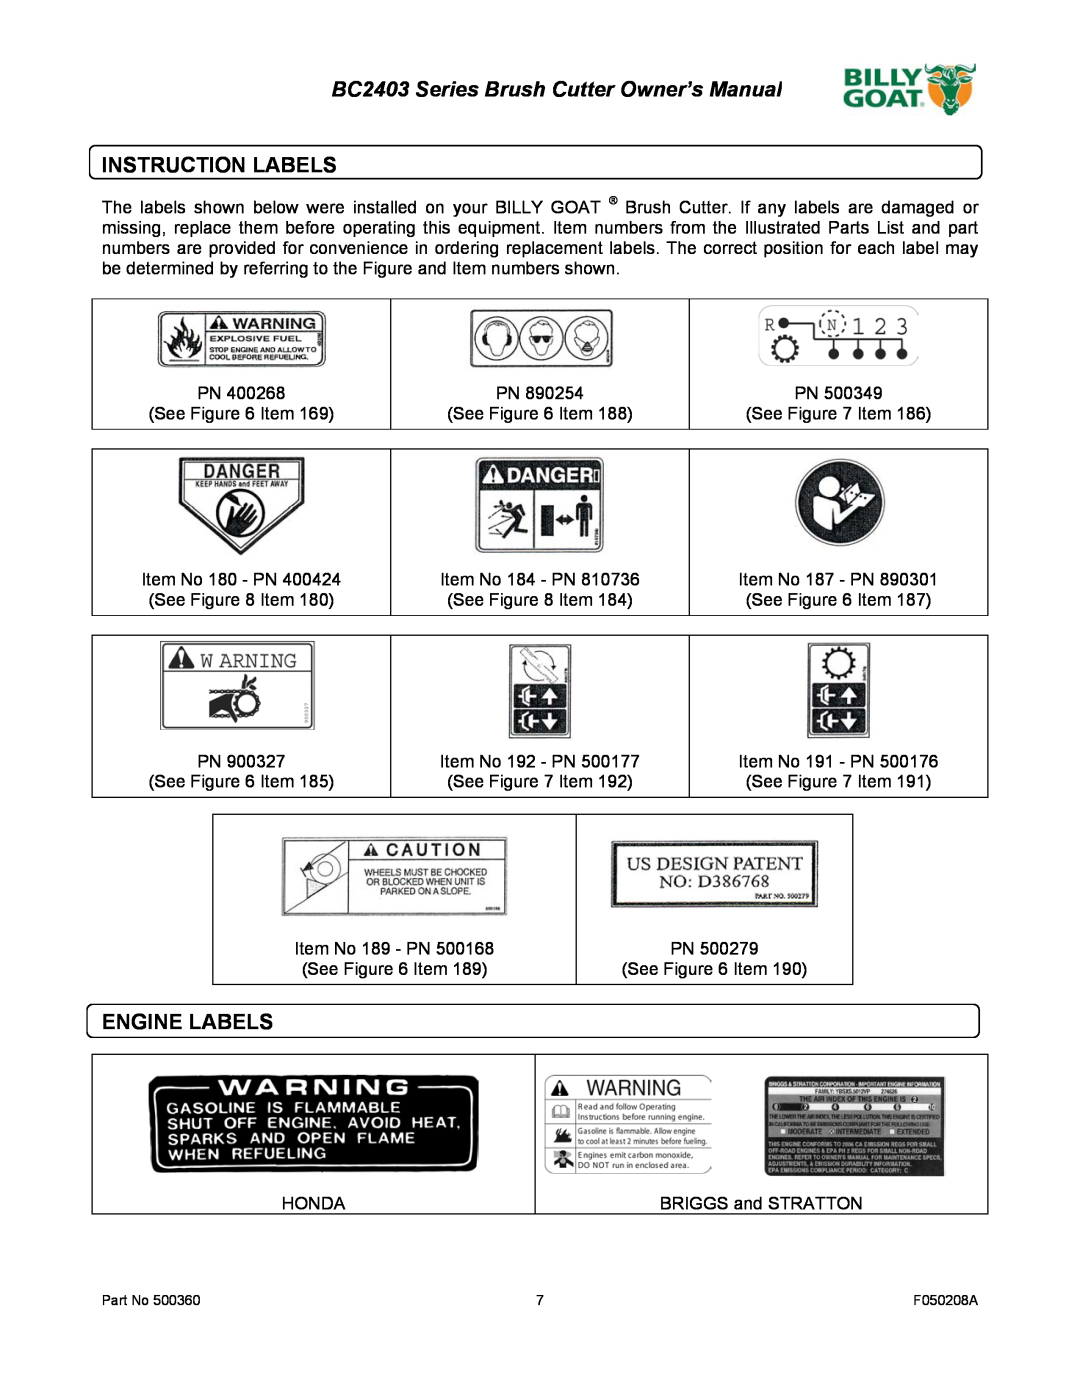 Billy Goat owner manual Instruction Labels, Engine Labels, BC2403 Series Brush Cutter Owner’s Manual 